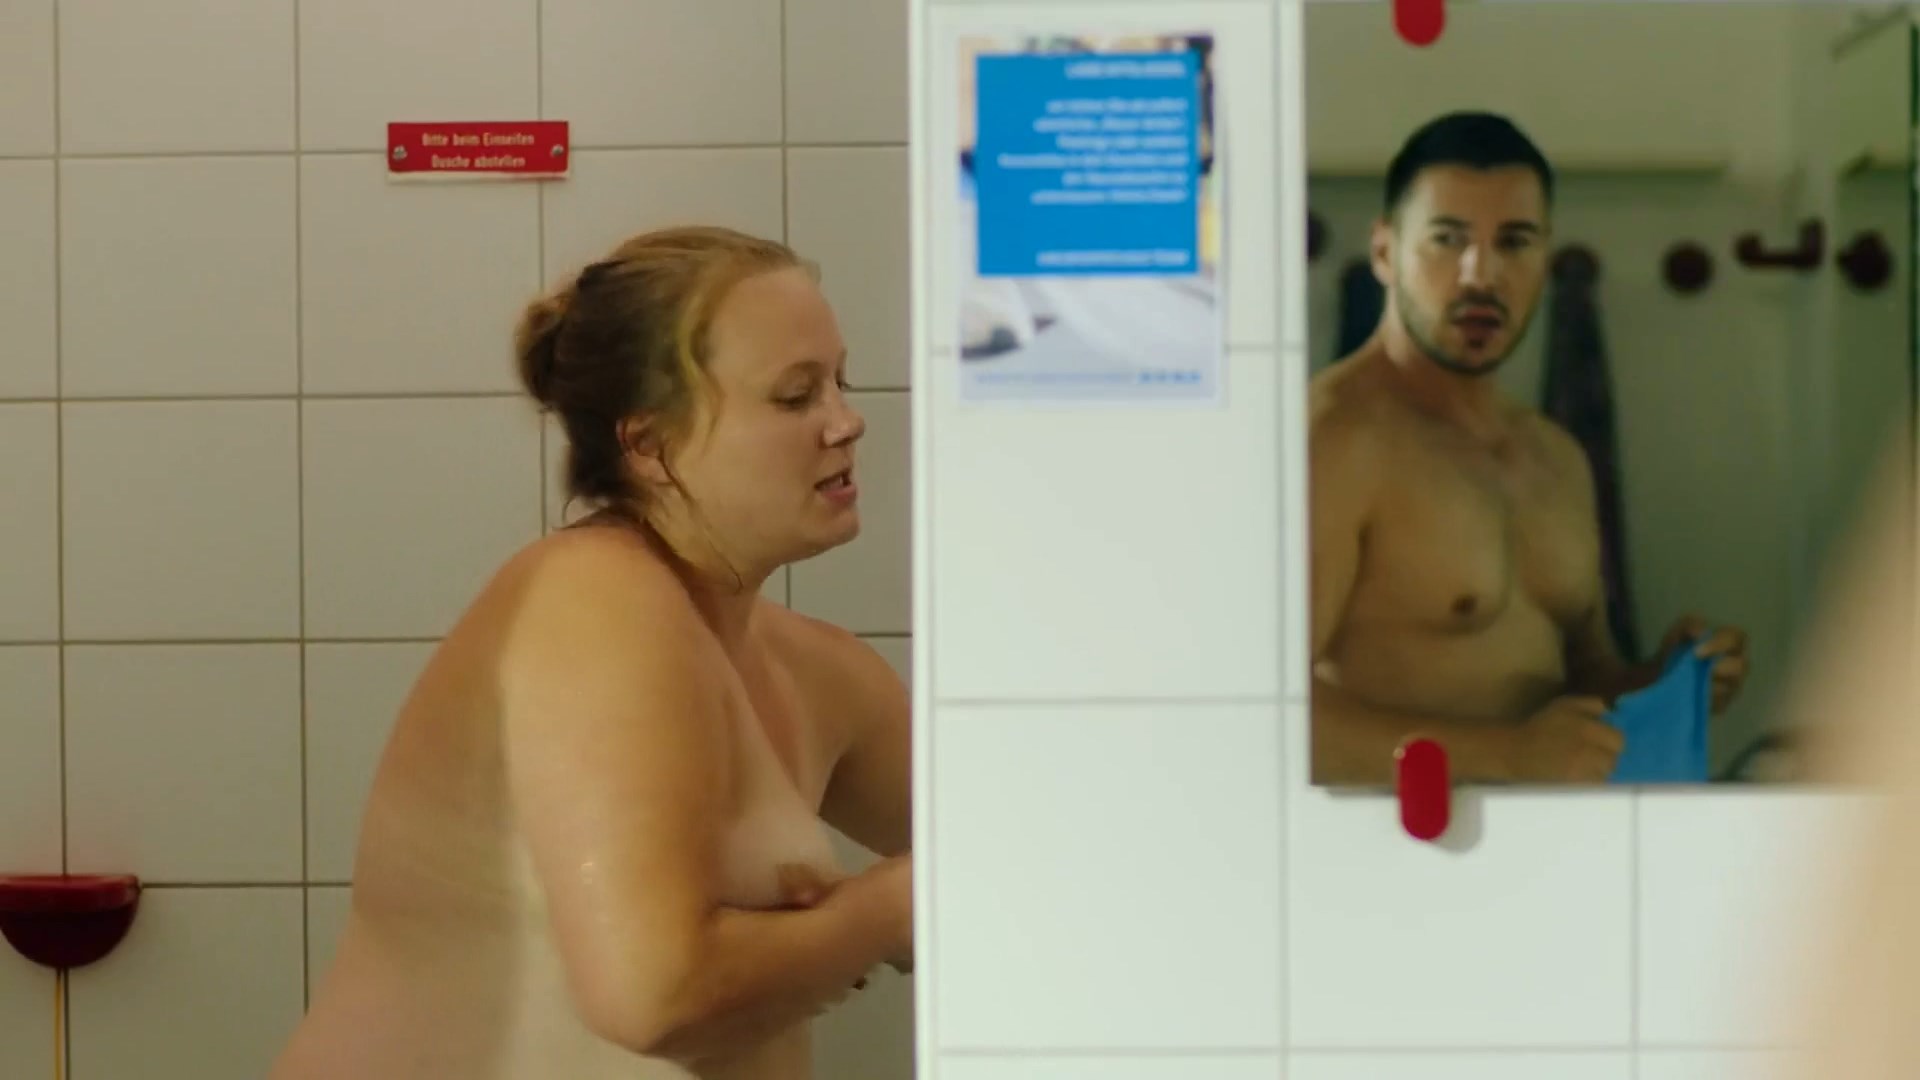 Katharina Kempter is nude in the movie “Bauch Beine Flo” which was released...